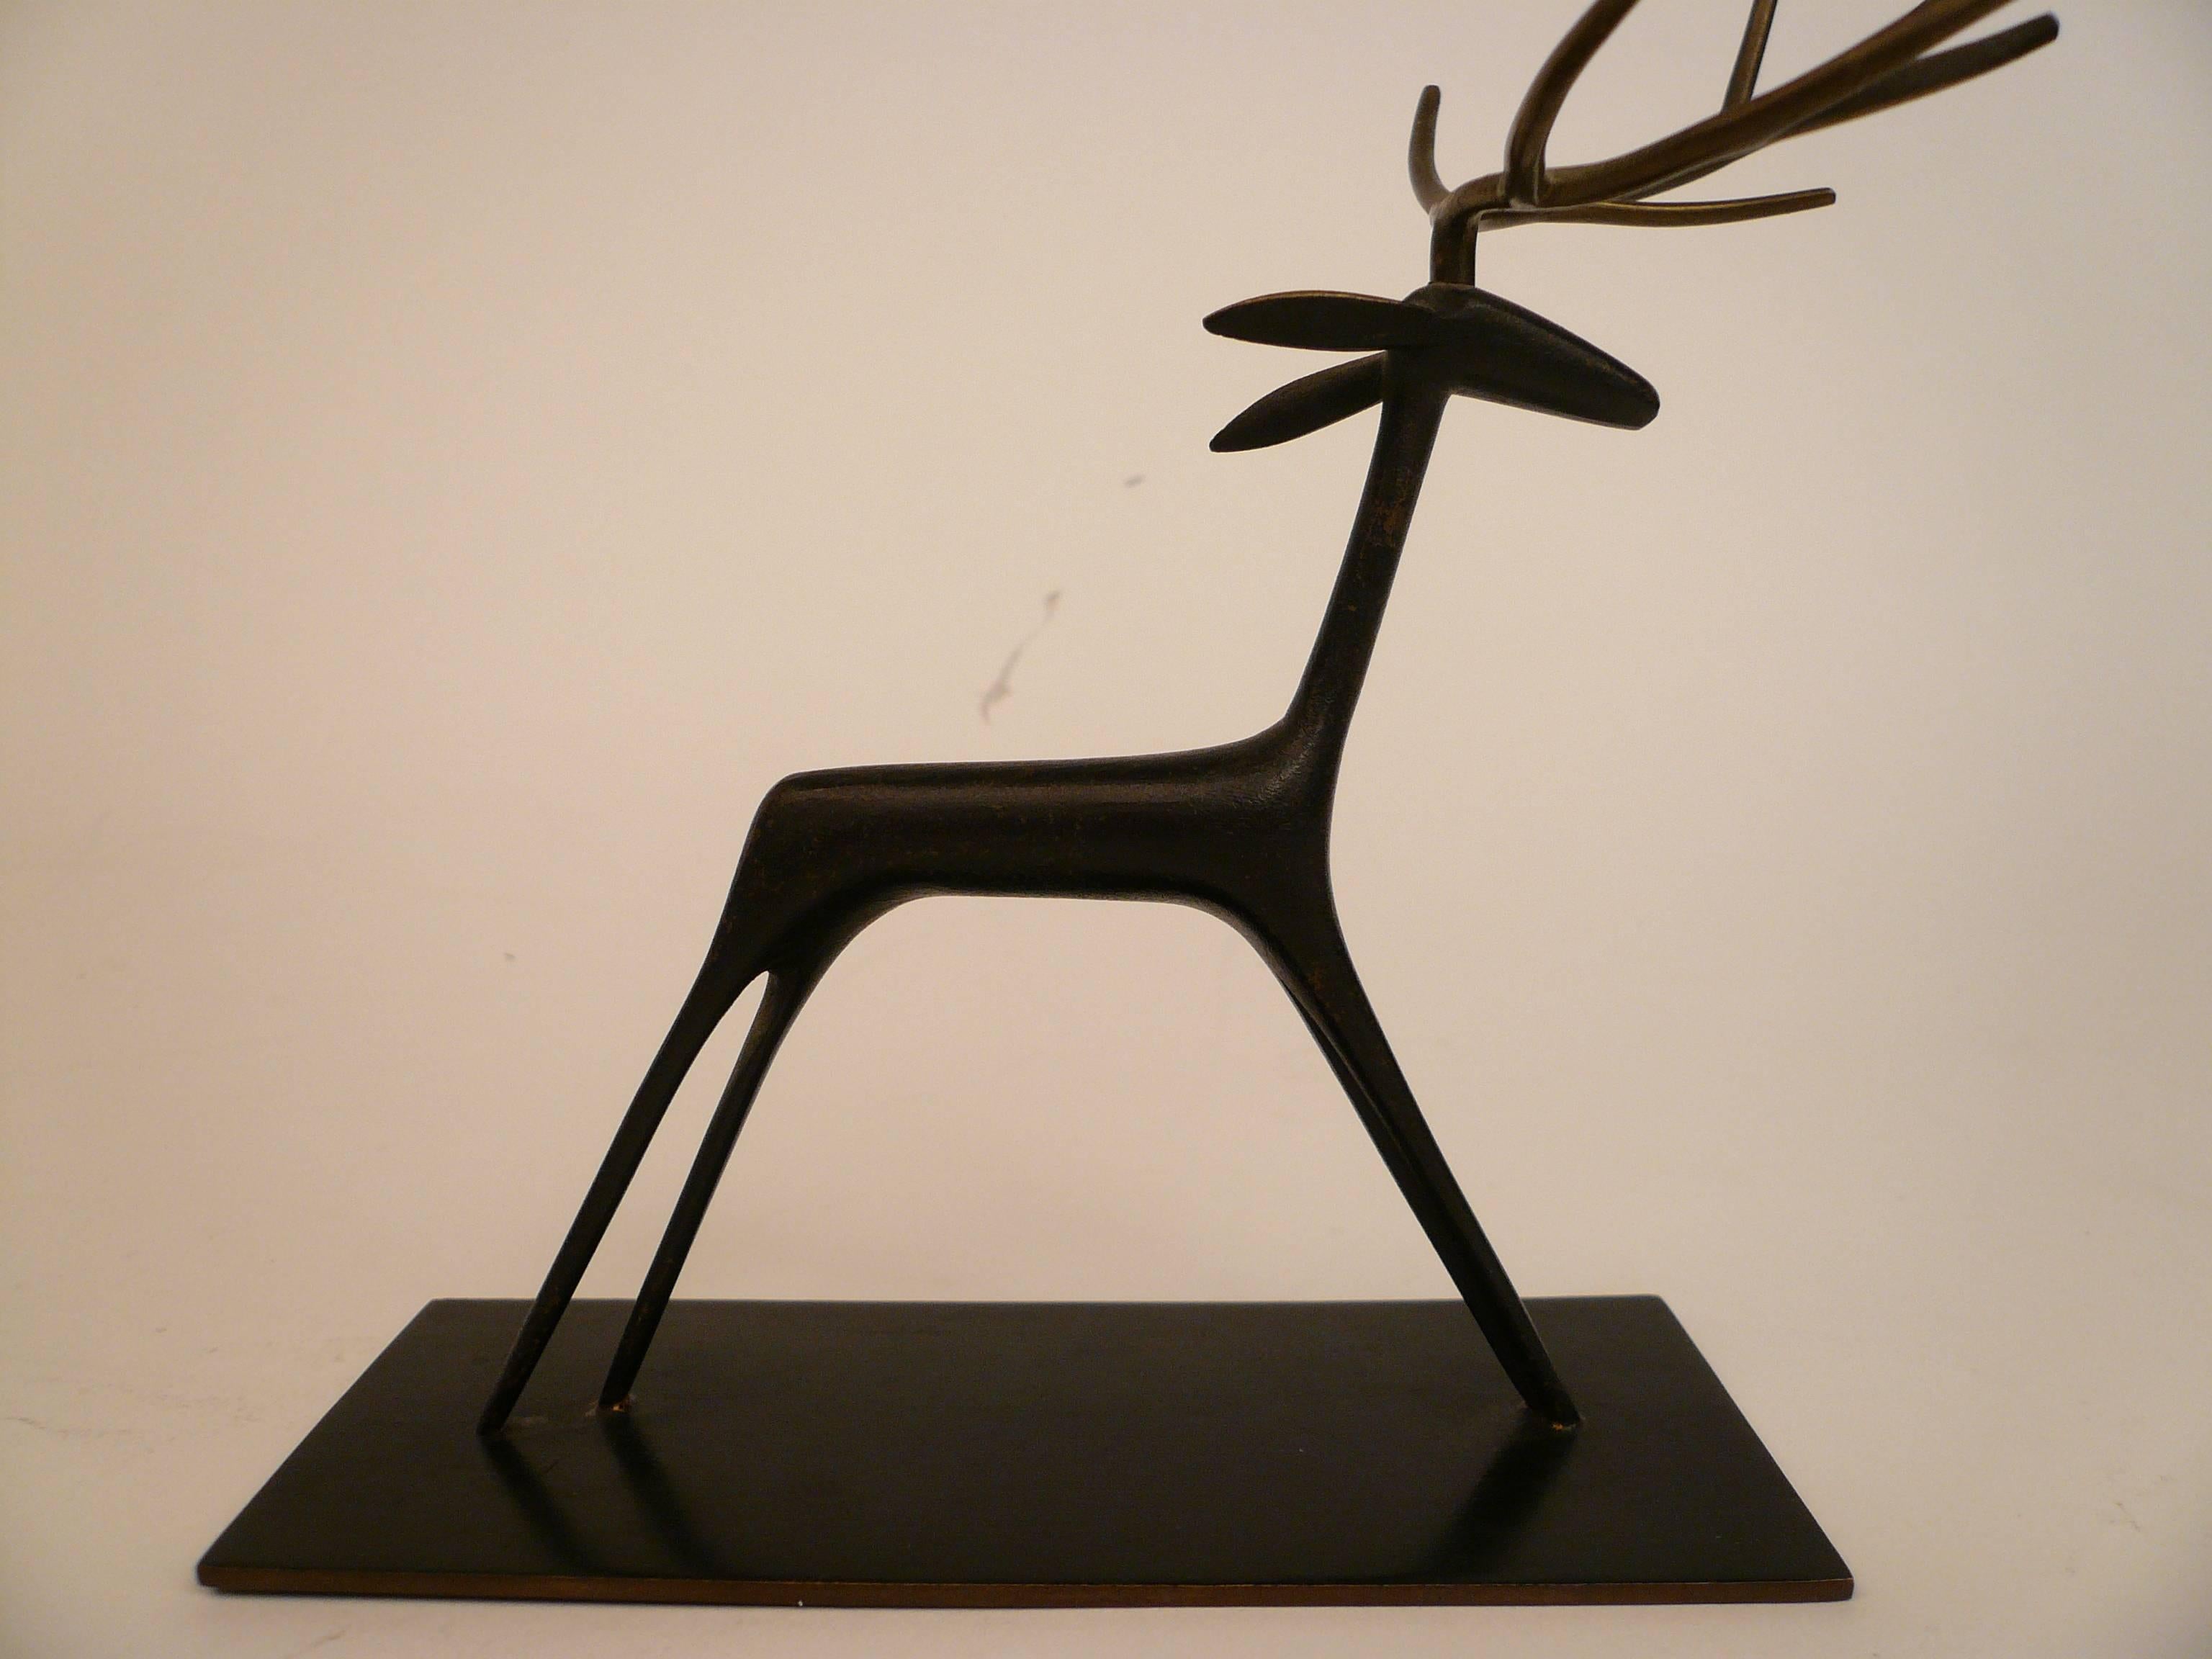 This whimsical sculpture of a stag is from the famed Werkstatte Hagenauer Wien.